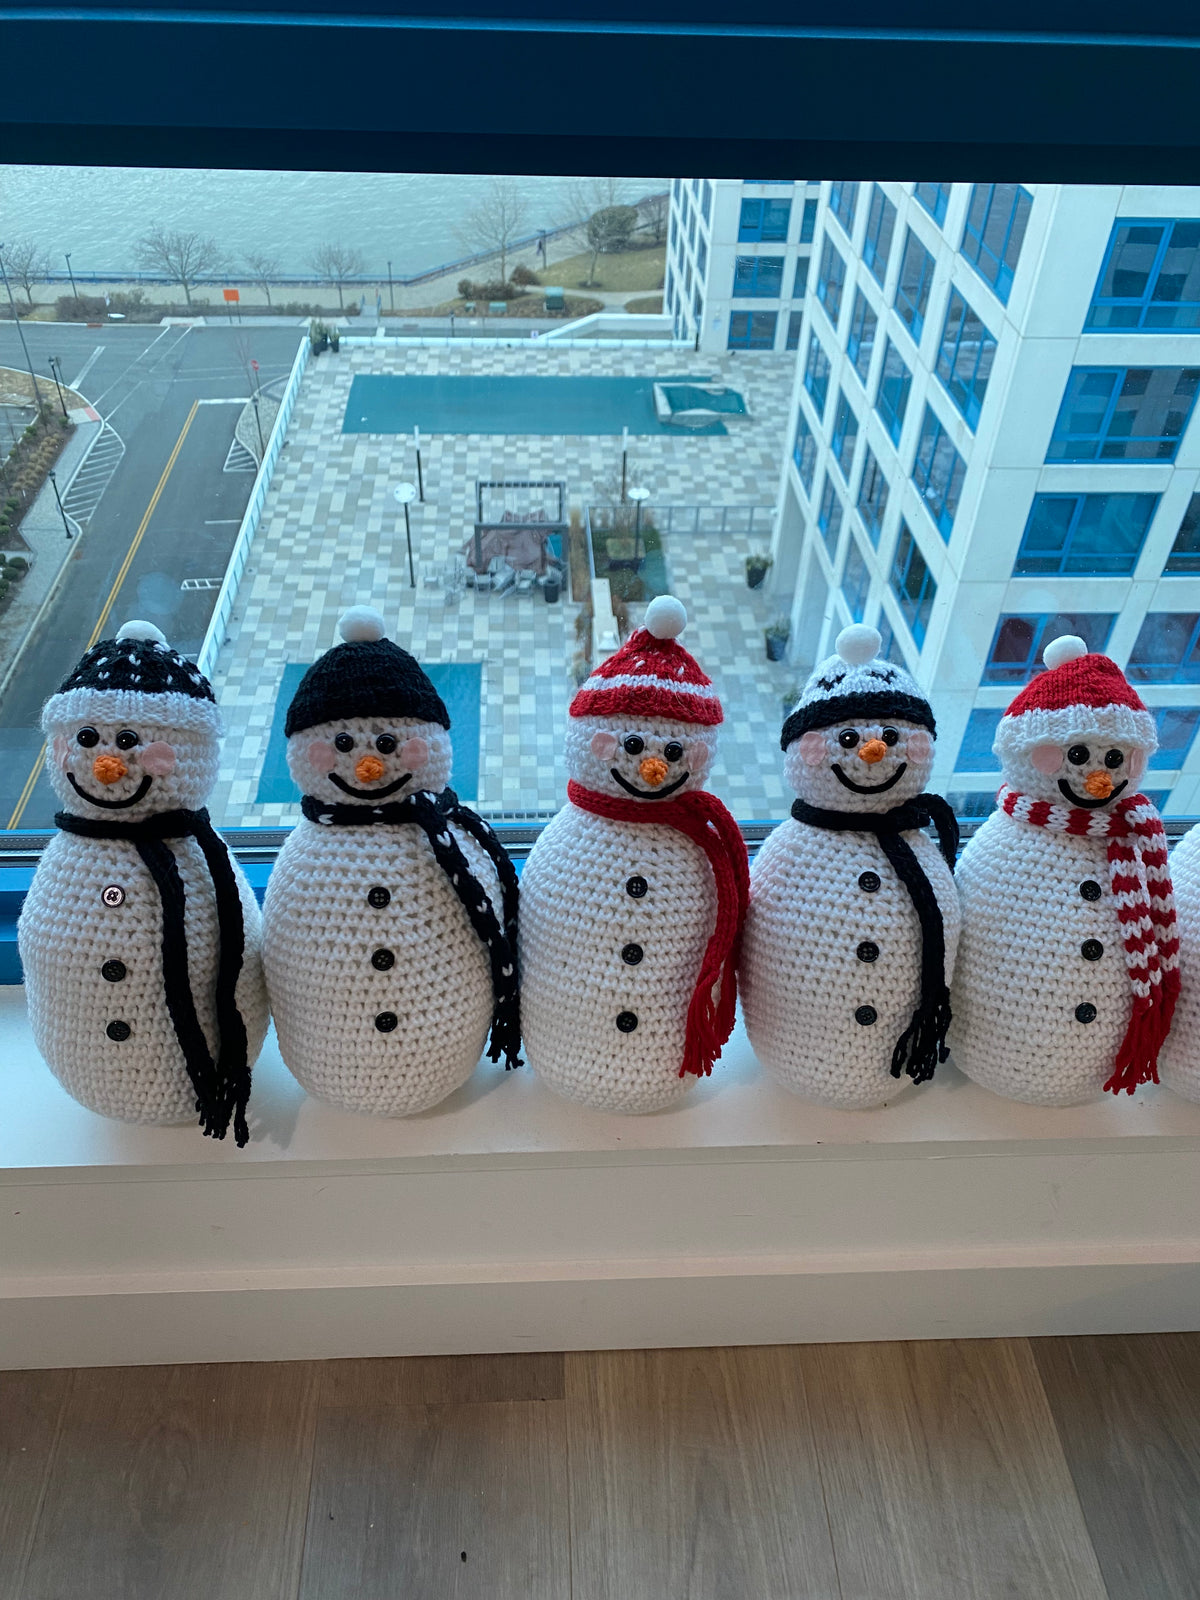 Our cute as can be crocheted snowman featuring multiple color options all with a shining smile to see you through the holiday season with a little extra cheer